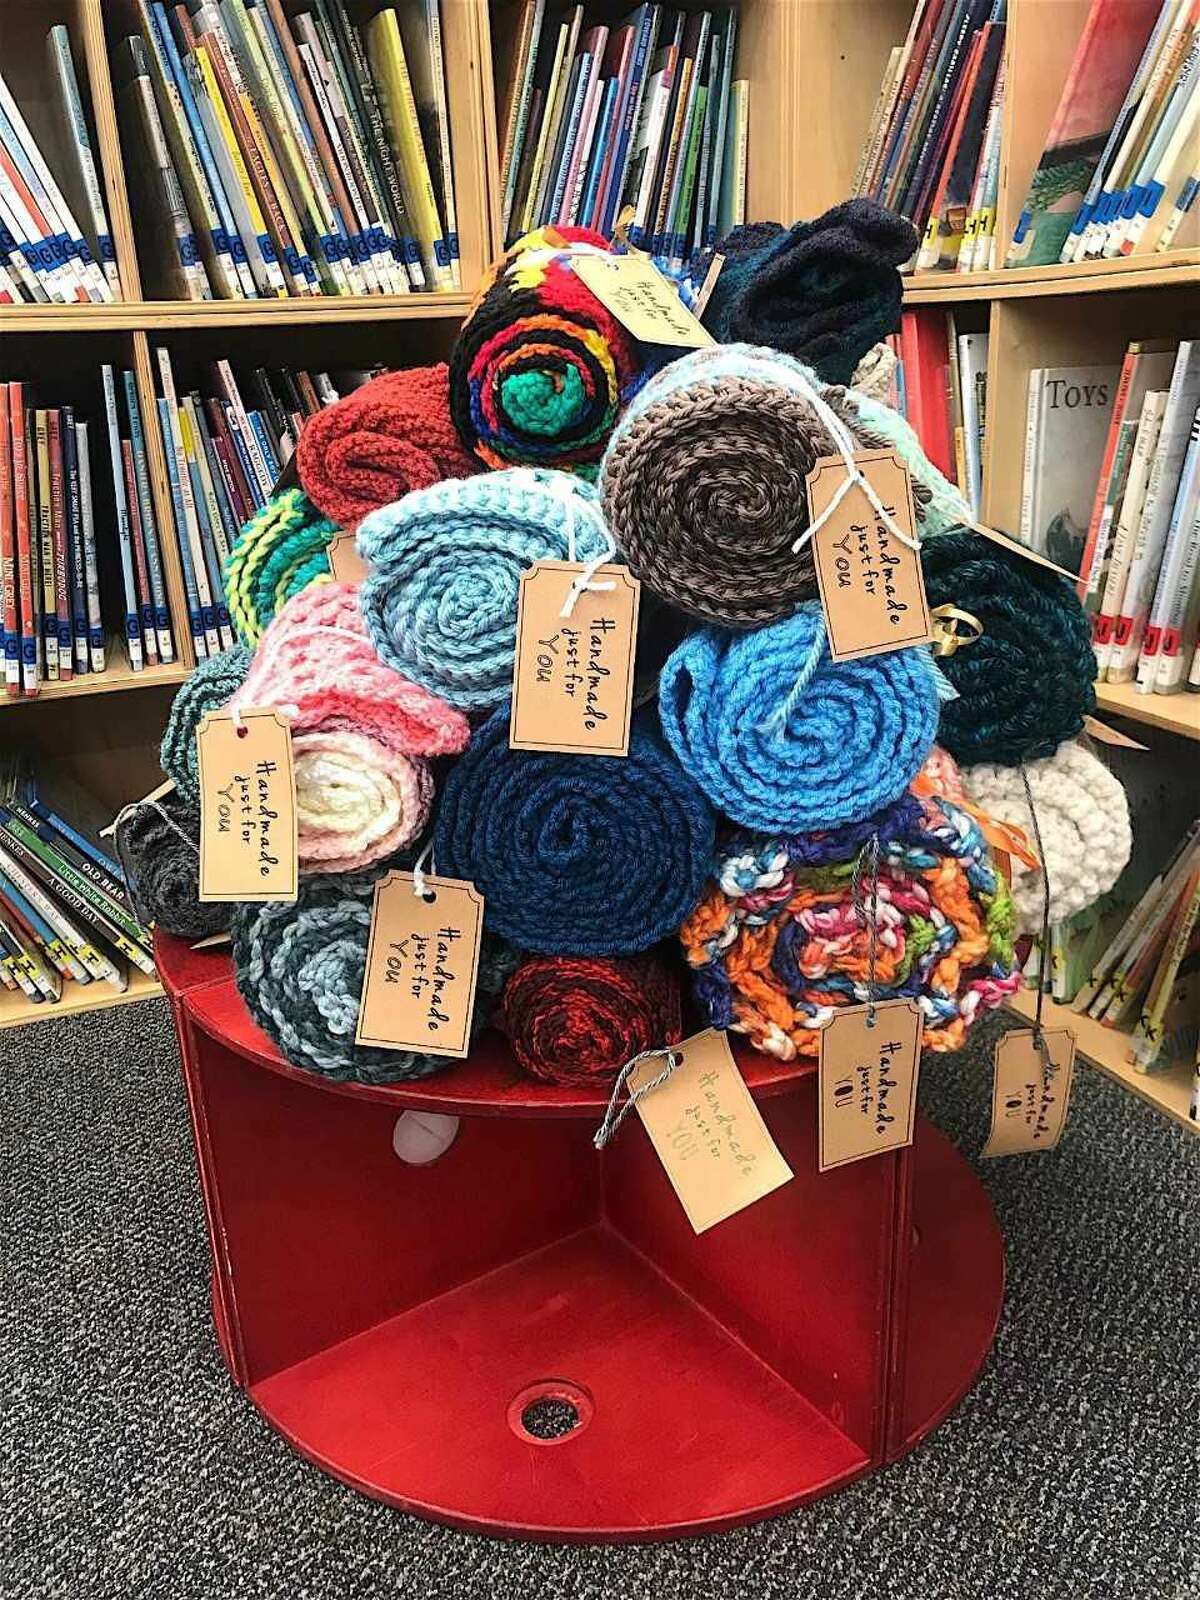 Knitted creations at Hamden Library with cards saying, "Handmade just for you."